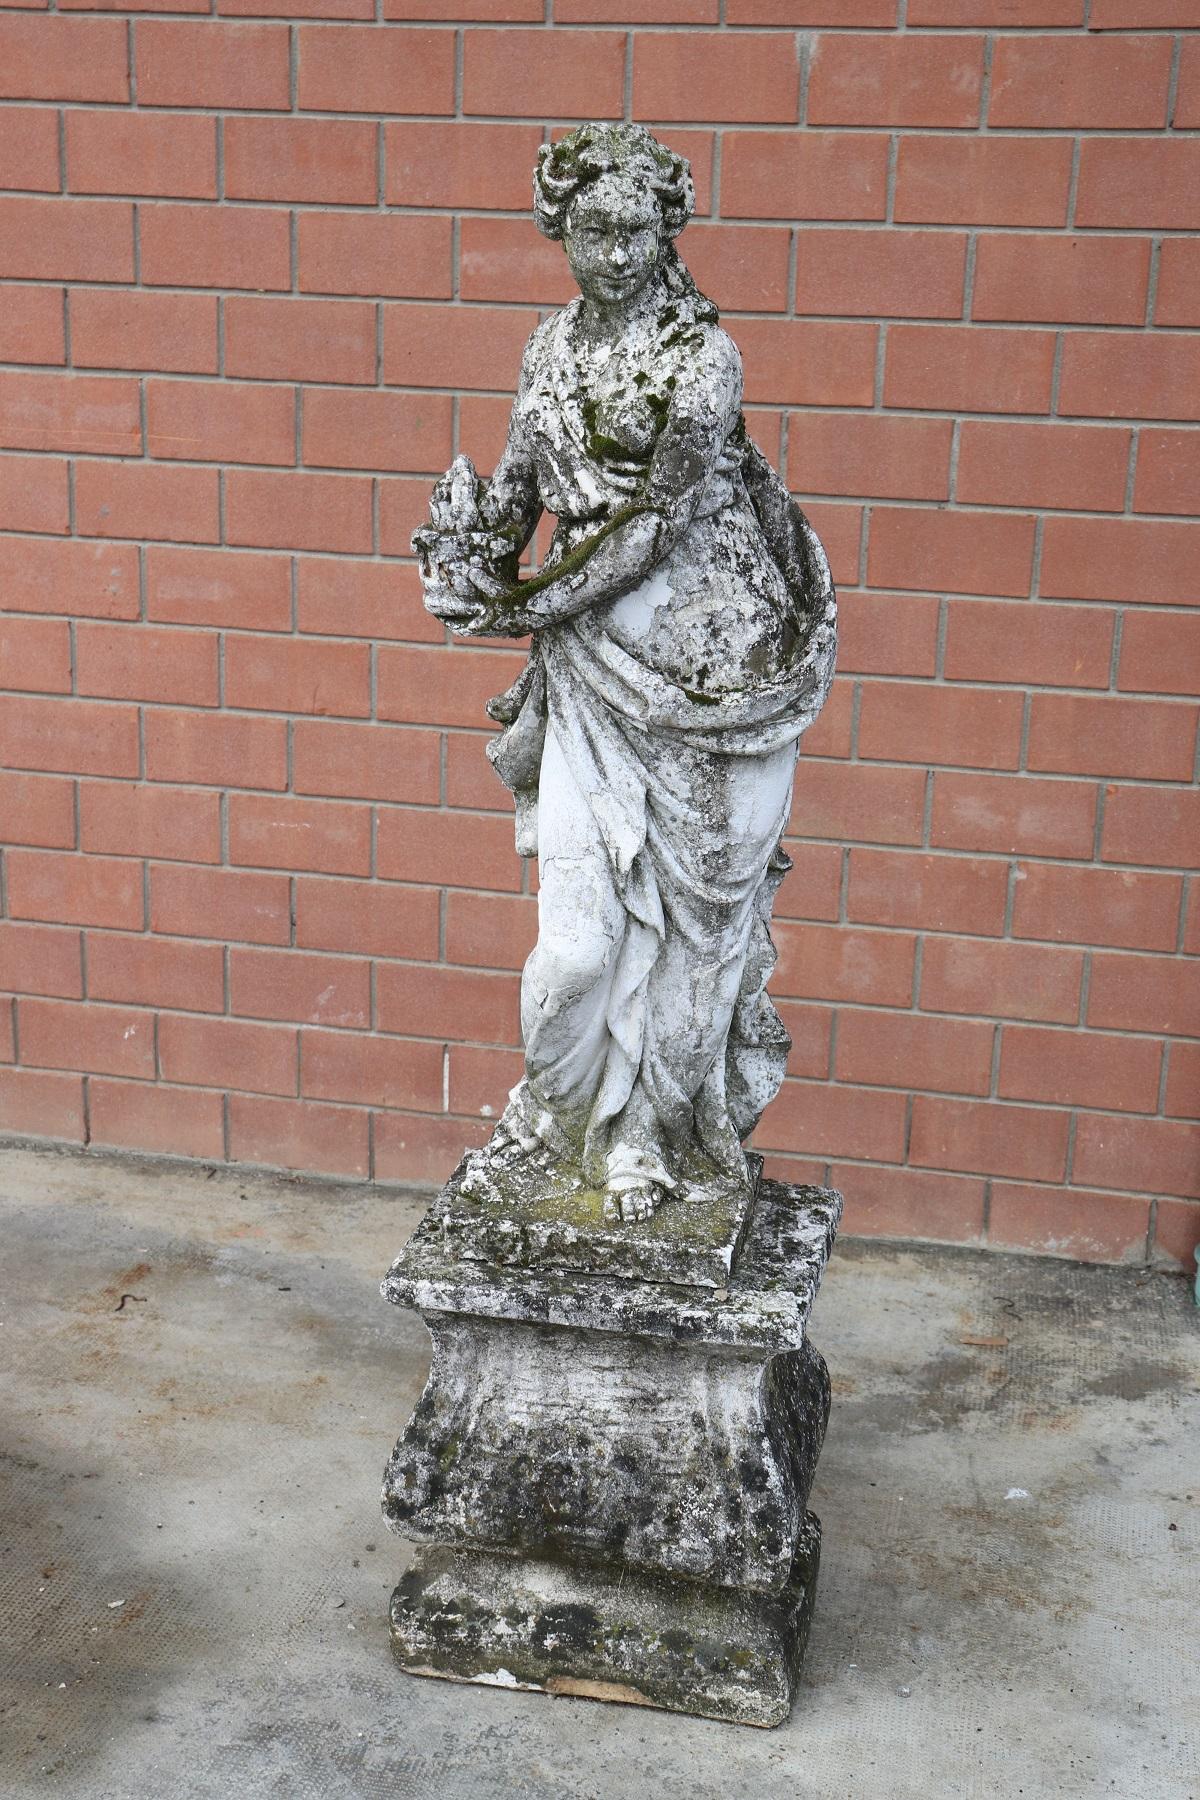 Beautiful refined garden statue in neoclassical style, circa 1930s main material stone mixed with gravel and cement. Beautiful and majestic statue. The stone shows signs of the passage of time. This statue is perfect for embellishing an important